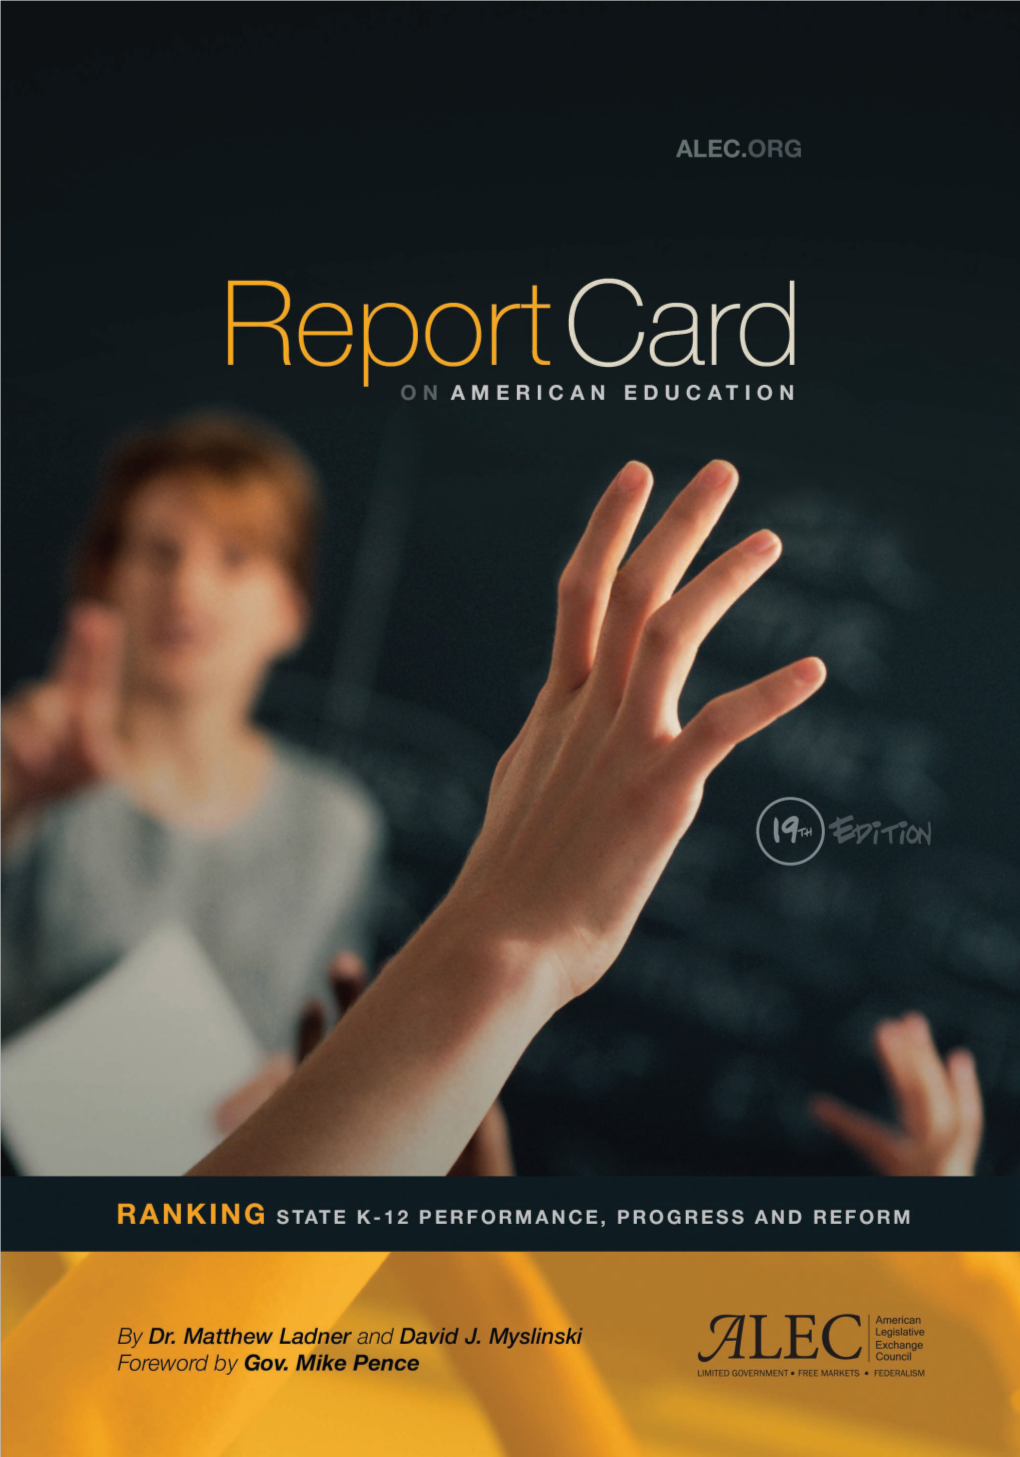 Report Card on American Education: Ranking State K-12 Performance, Progress and Reform © 2014 American Legislative Exchange Council